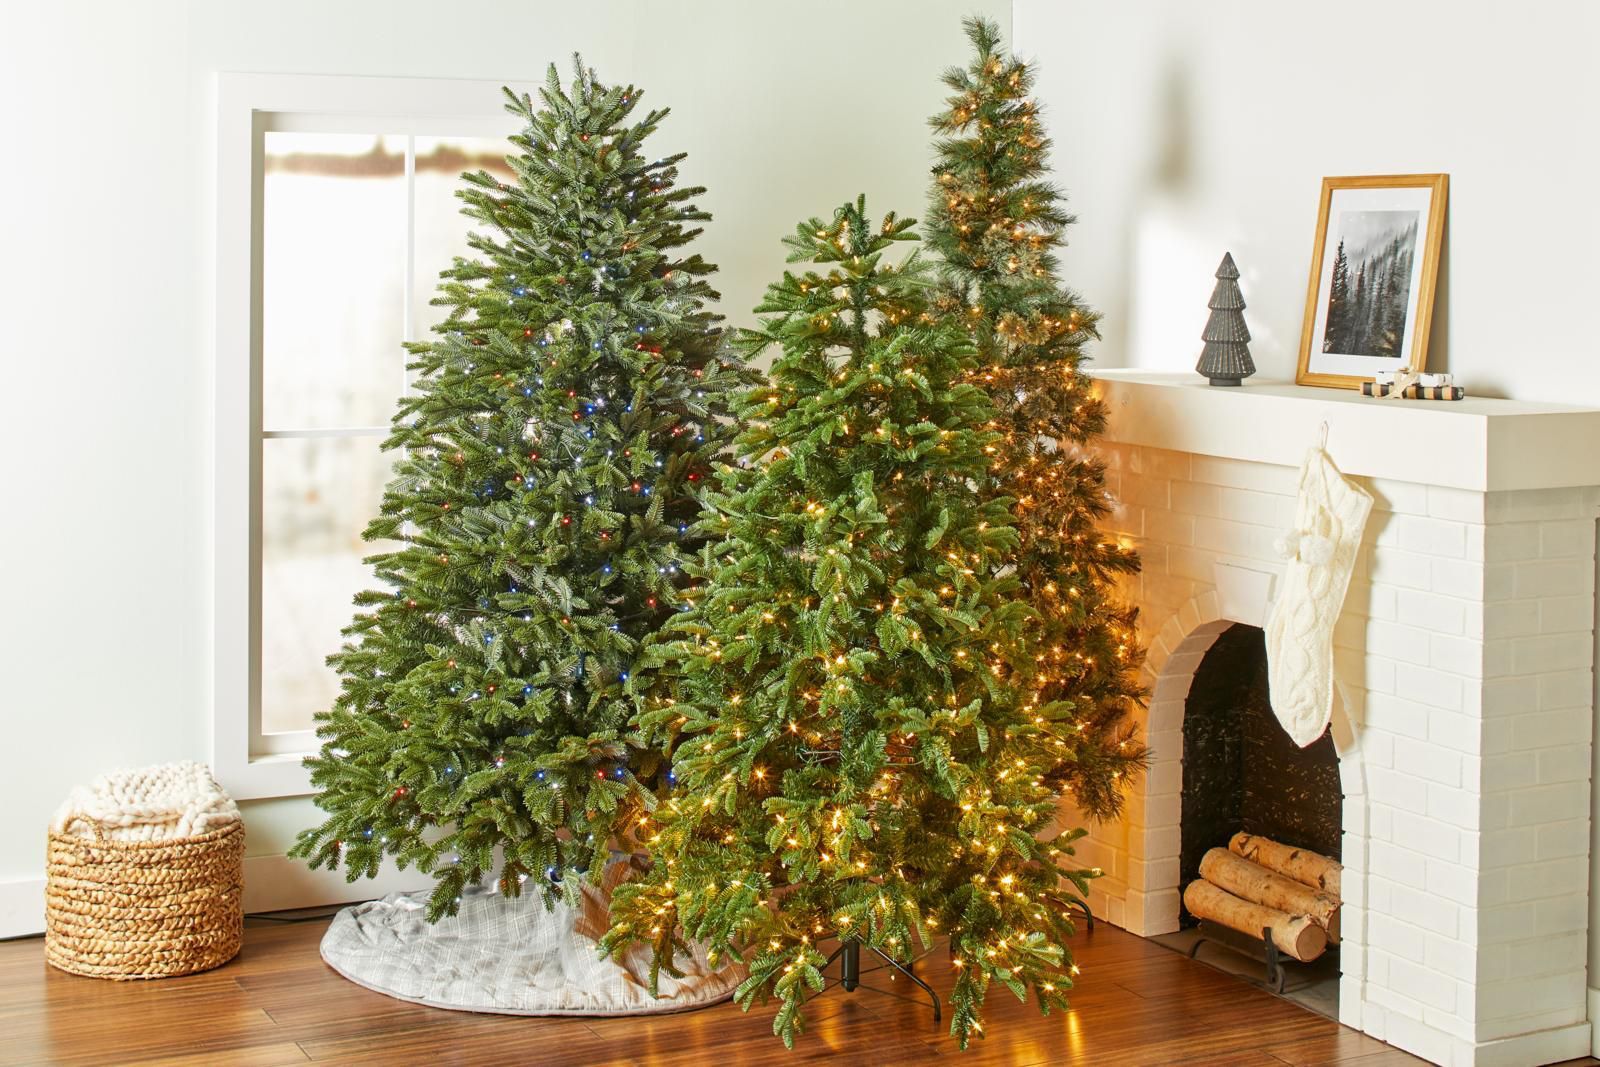 bhg primary artificial christmas trees 01 primary 647577a7f12f46928beb8042b43daaef How Long Do Real Christmas Trees Last?